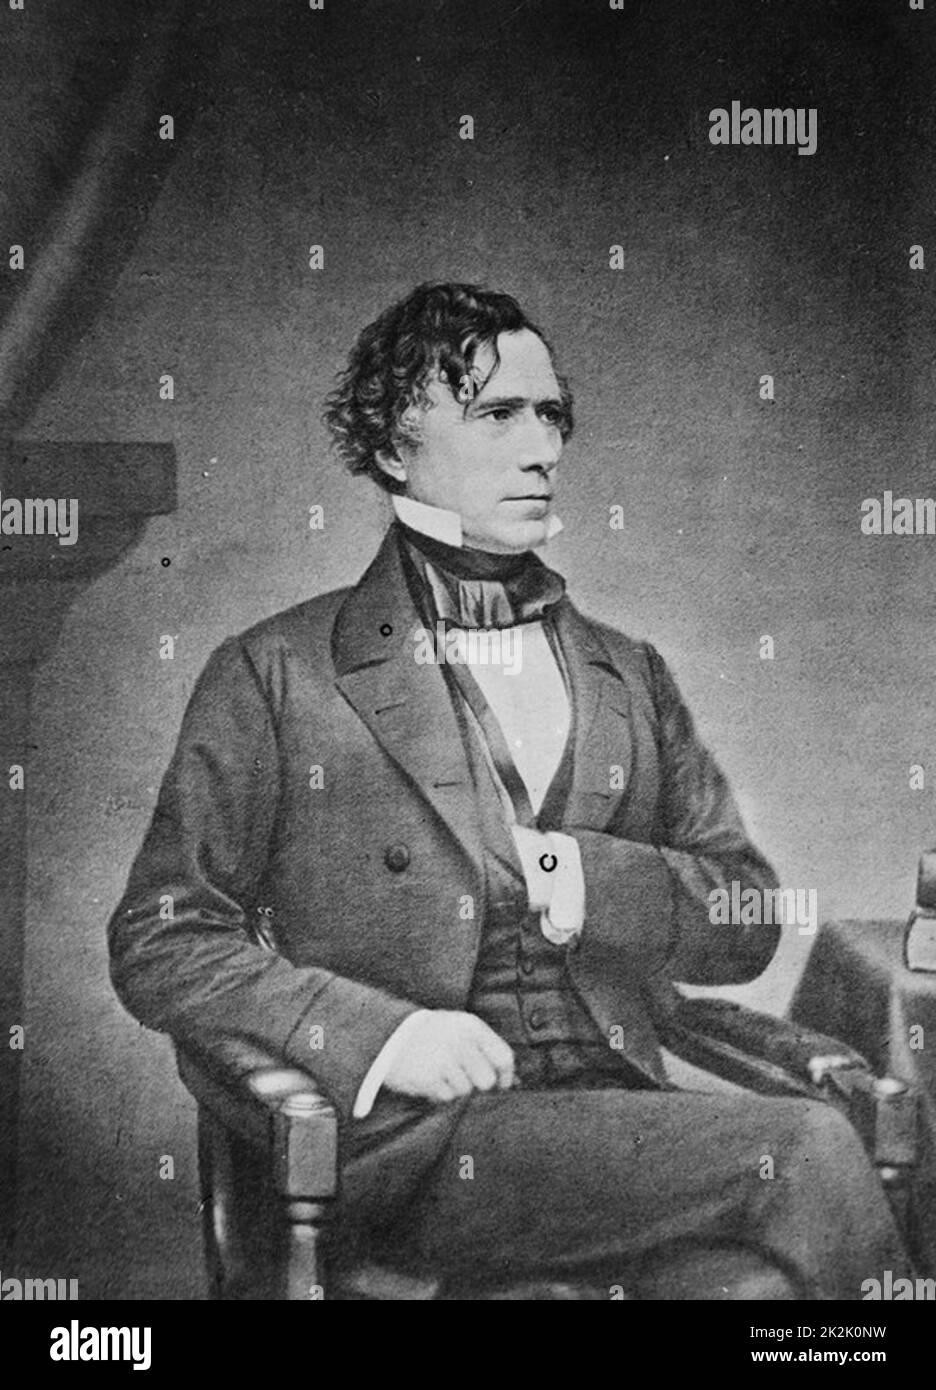 Franklin Pierce (1804-1869) American lawyer and politician, 14th President of the United States 1853-1857 . Three-quarter length portrait of Pierce seated and looking towards the right, 1855-1865. Stock Photo